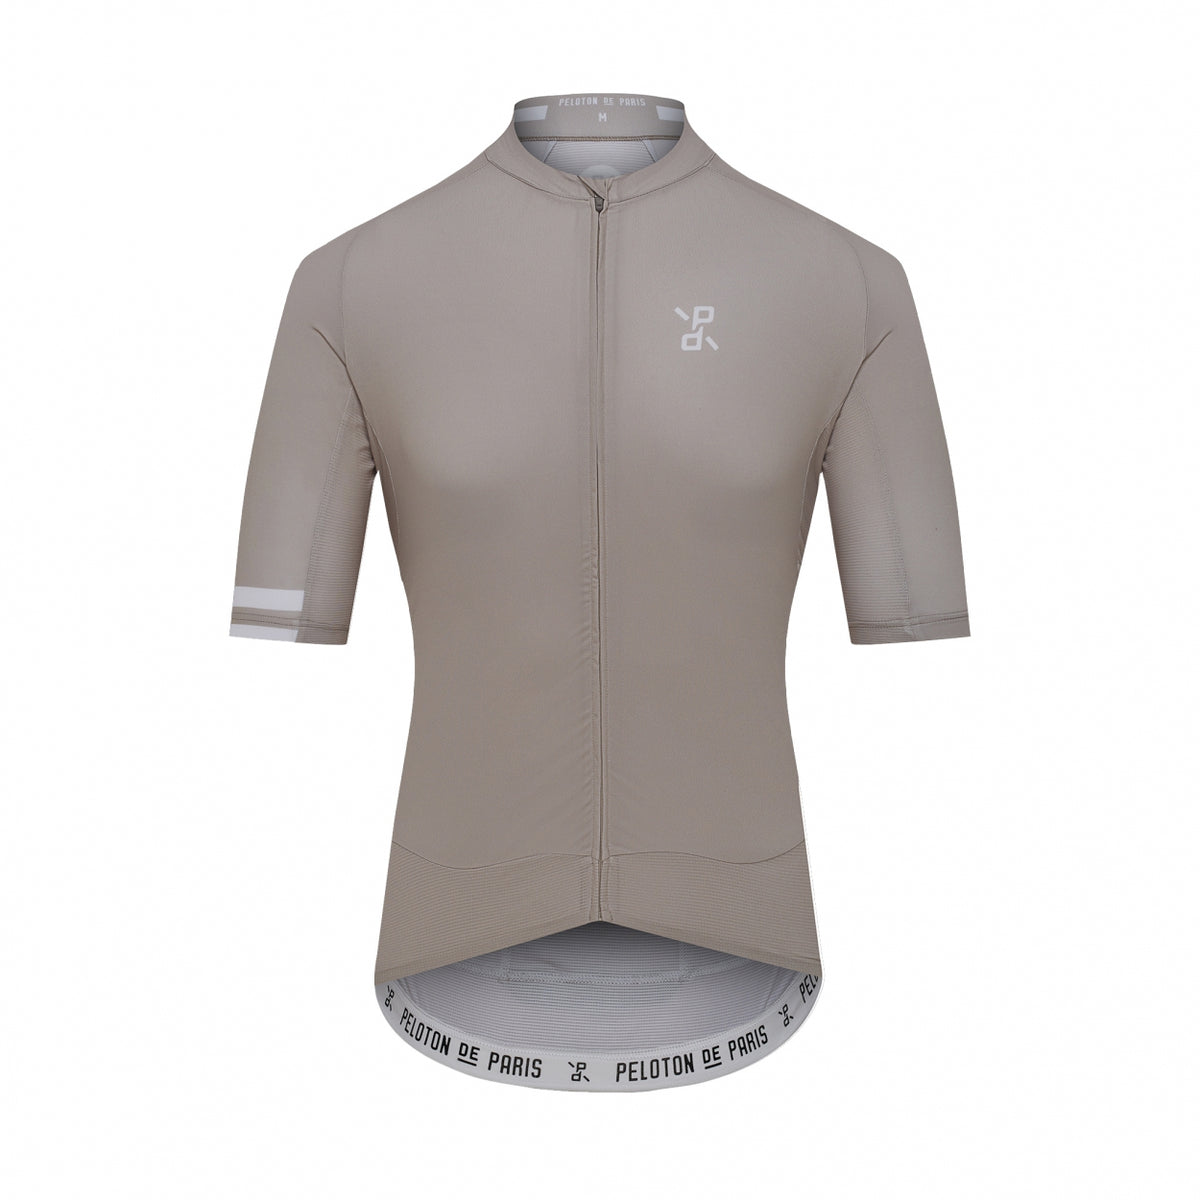 Recon - Recon Jersey SS | Beige/Sand